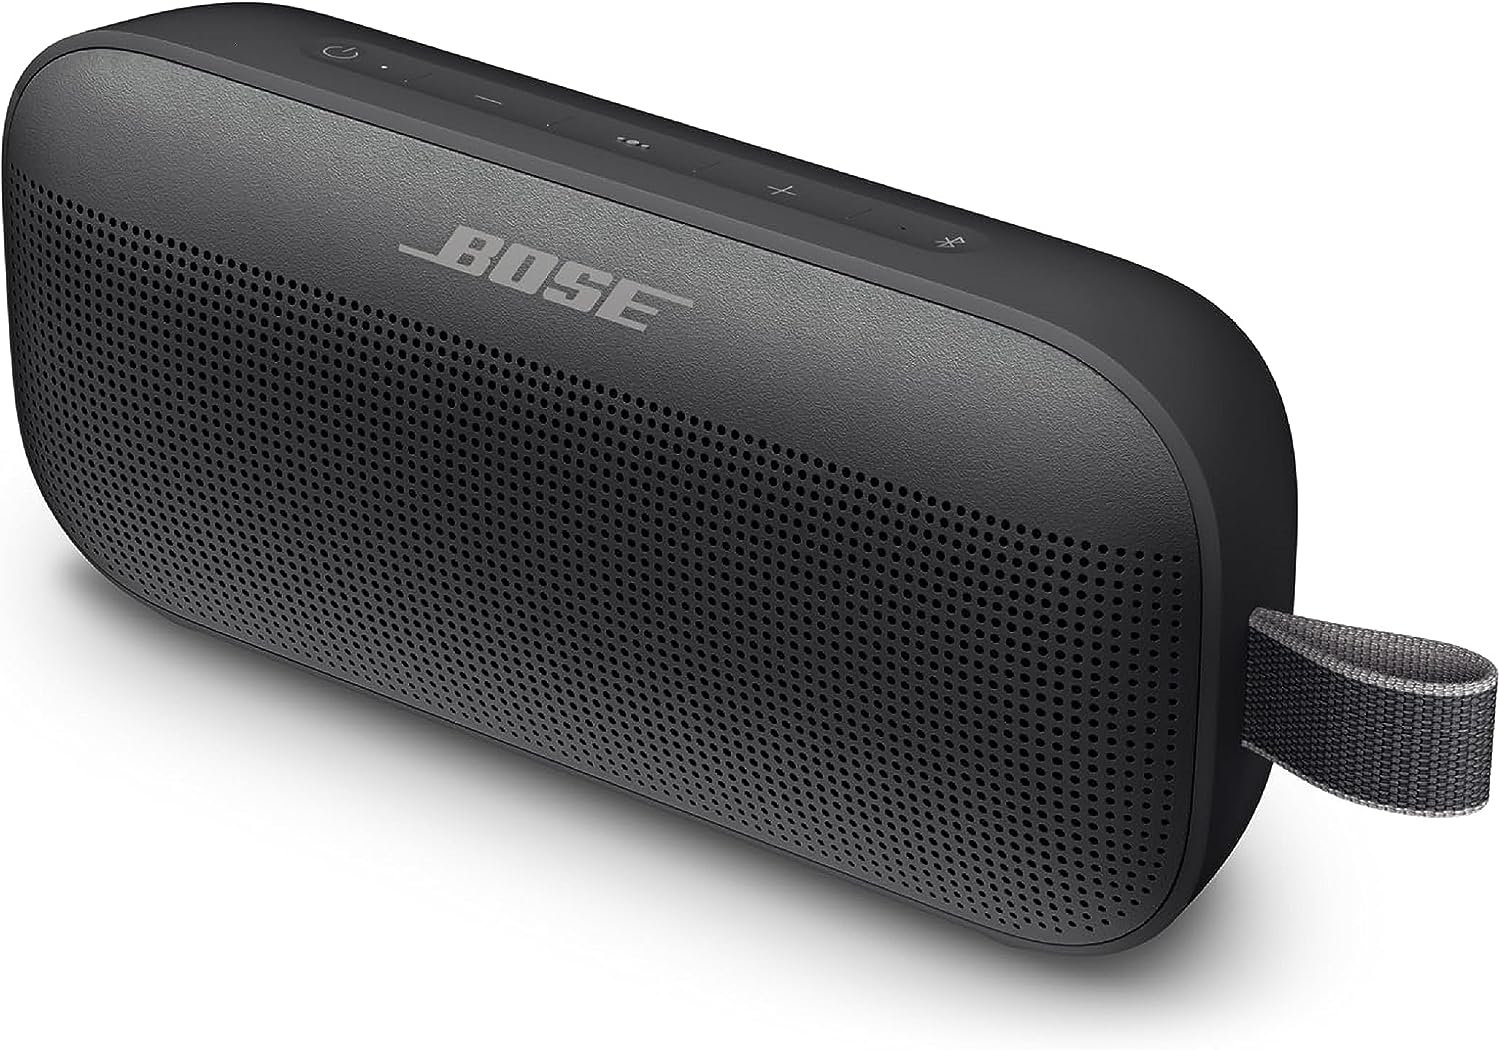 Bose's new rugged Bluetooth speaker floats in water